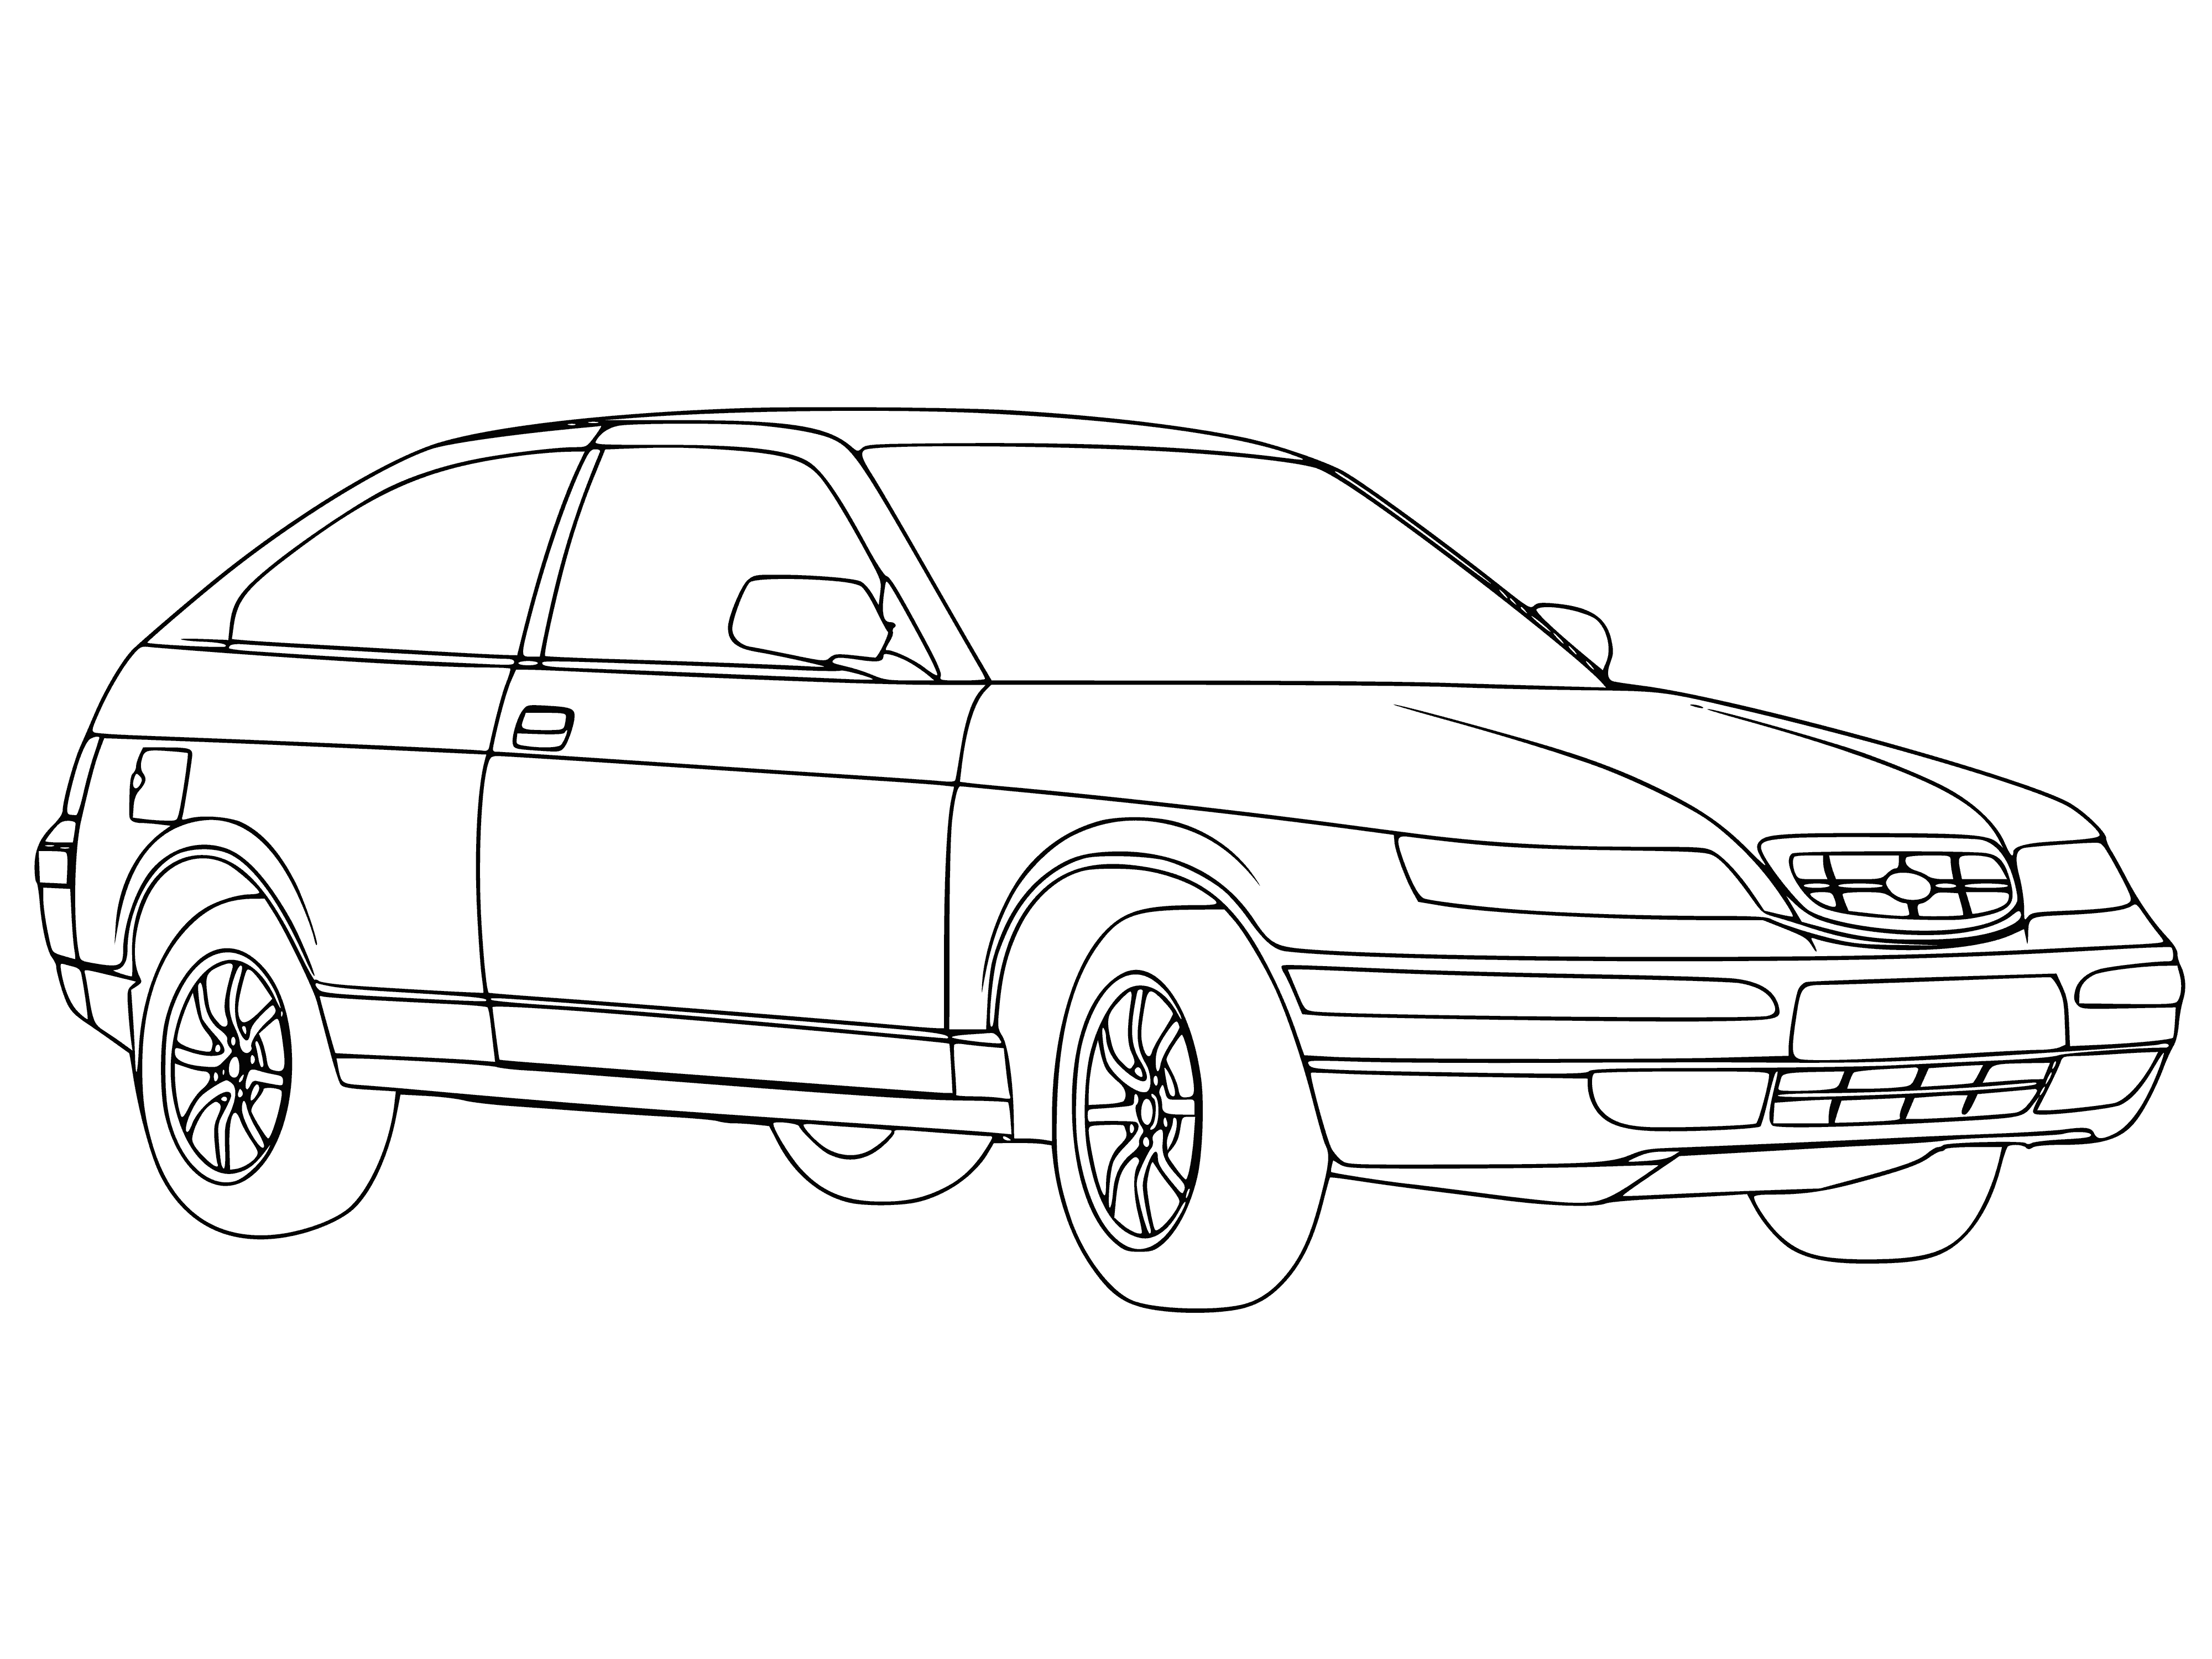 coloring page: White car with black roof parked on road besides building; 4 round headlights, large grille, 4 wheels, 4 doors.